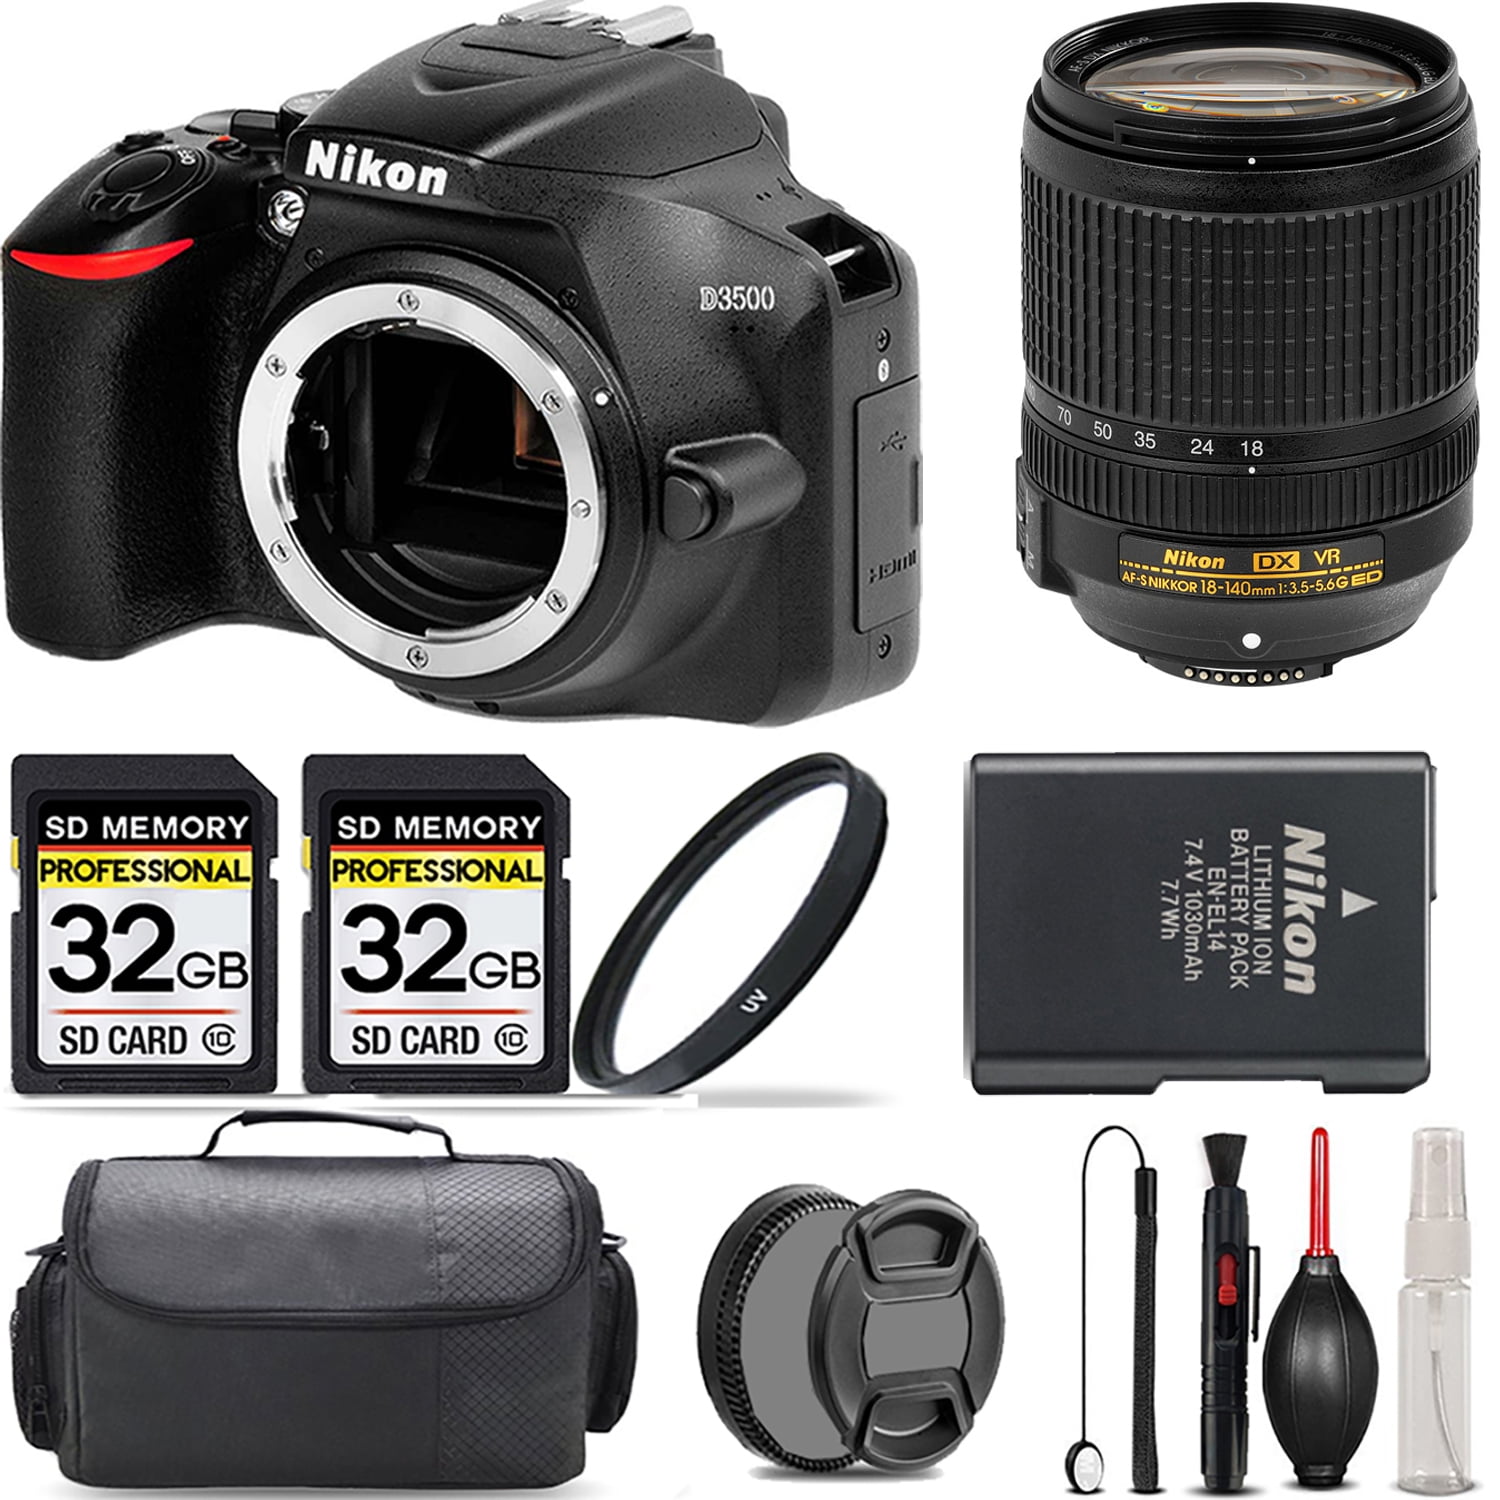 Nikon D7500 DSLR Camera Kit with 18-55mm VR Zoom Lens,32GB Memory,  Case,Tripod w/Hand Grip and More28pc Bundle 